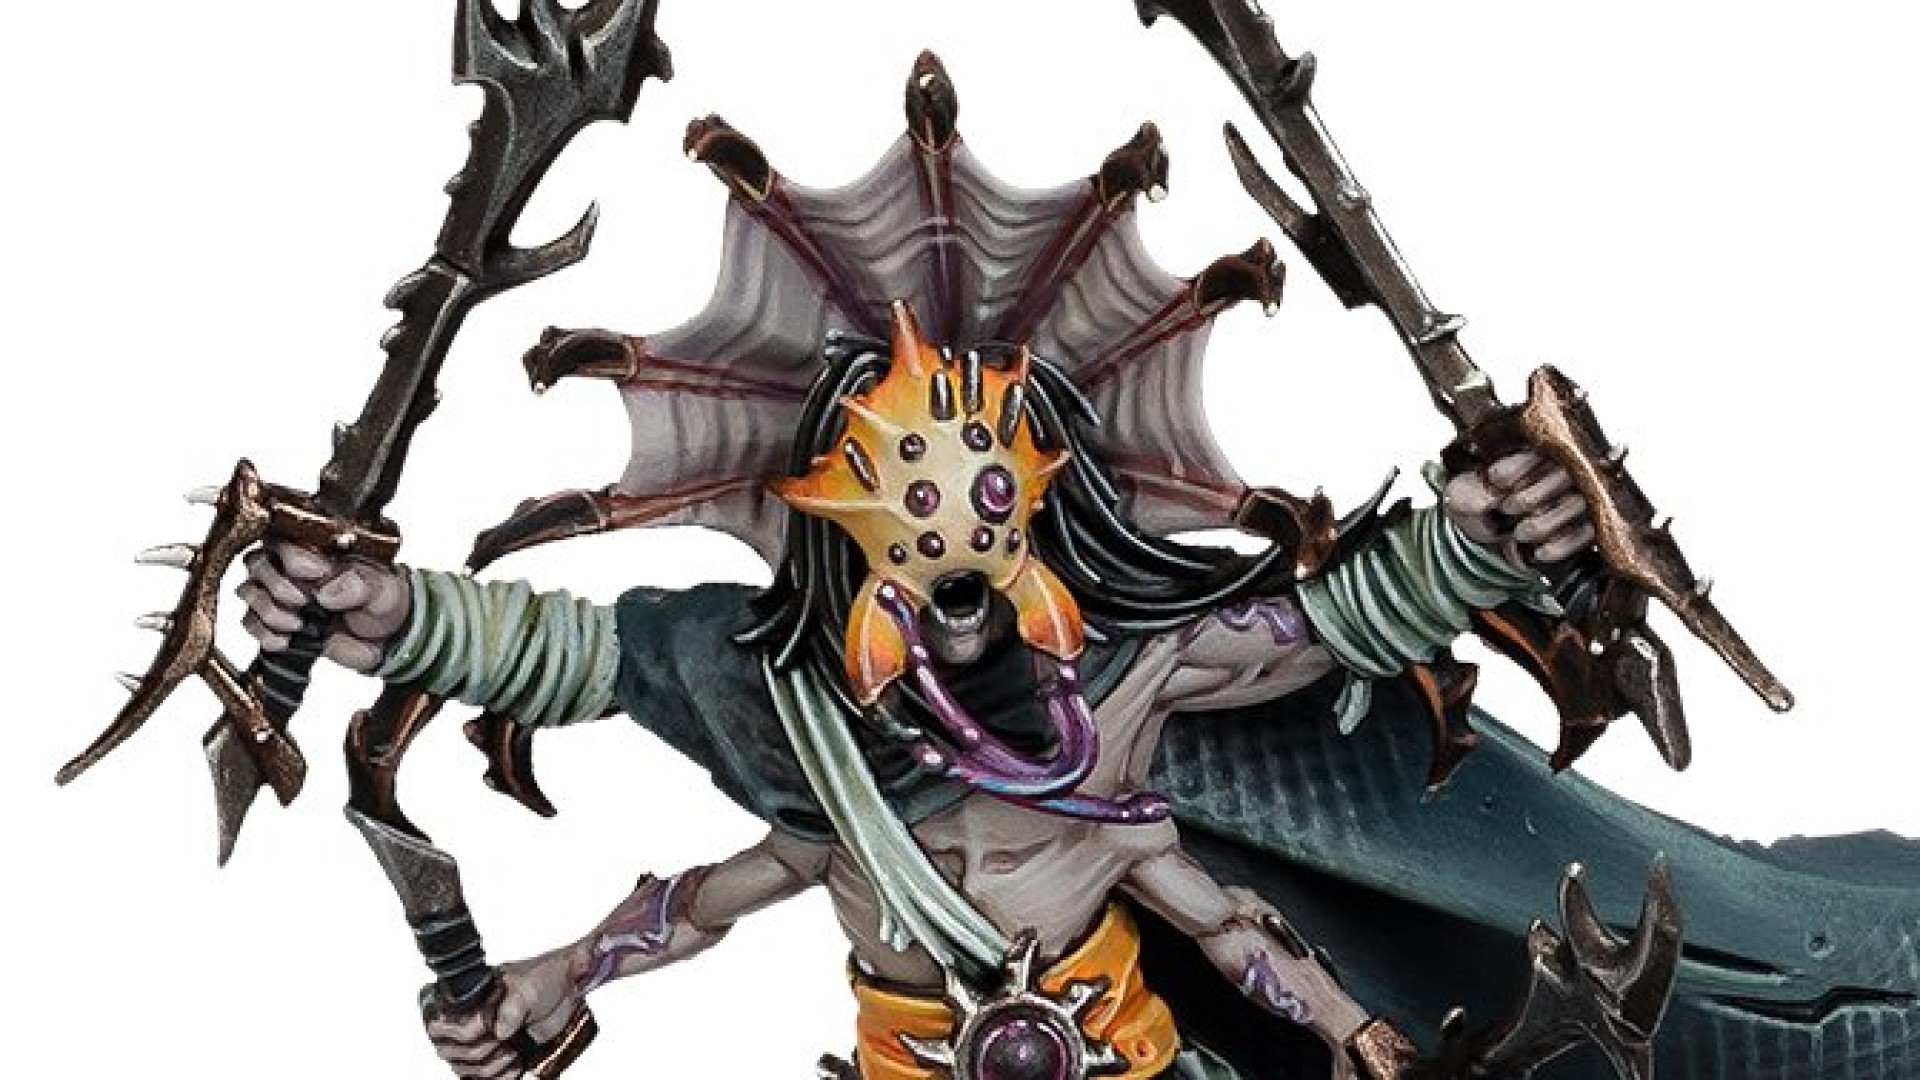 Warhammer Age of Sigmar: Warcry gets its very own spider man